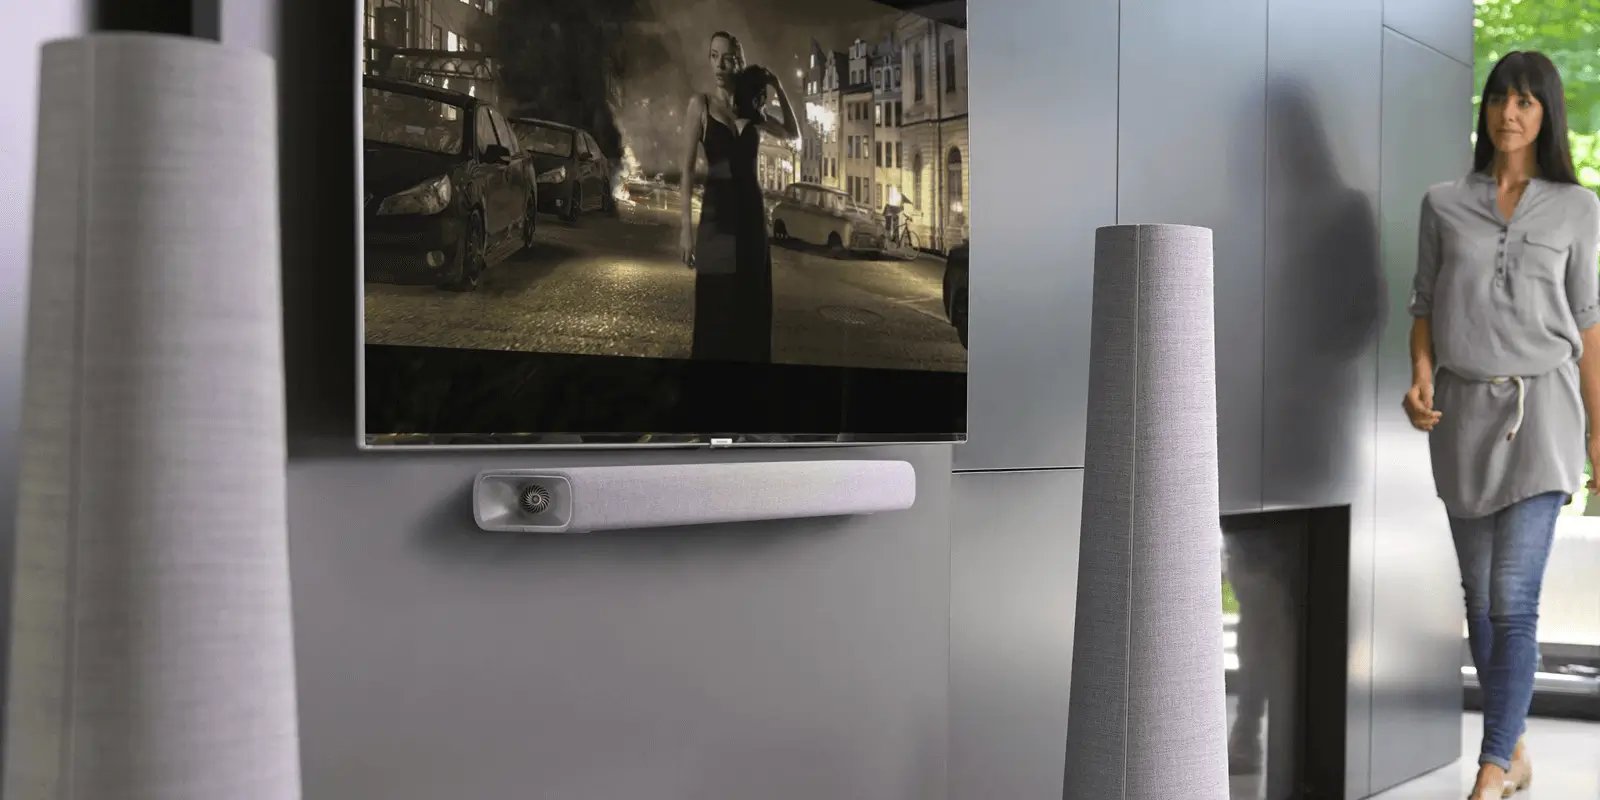 This image shows a sound system with a speaker bar below a TV on a grey wall